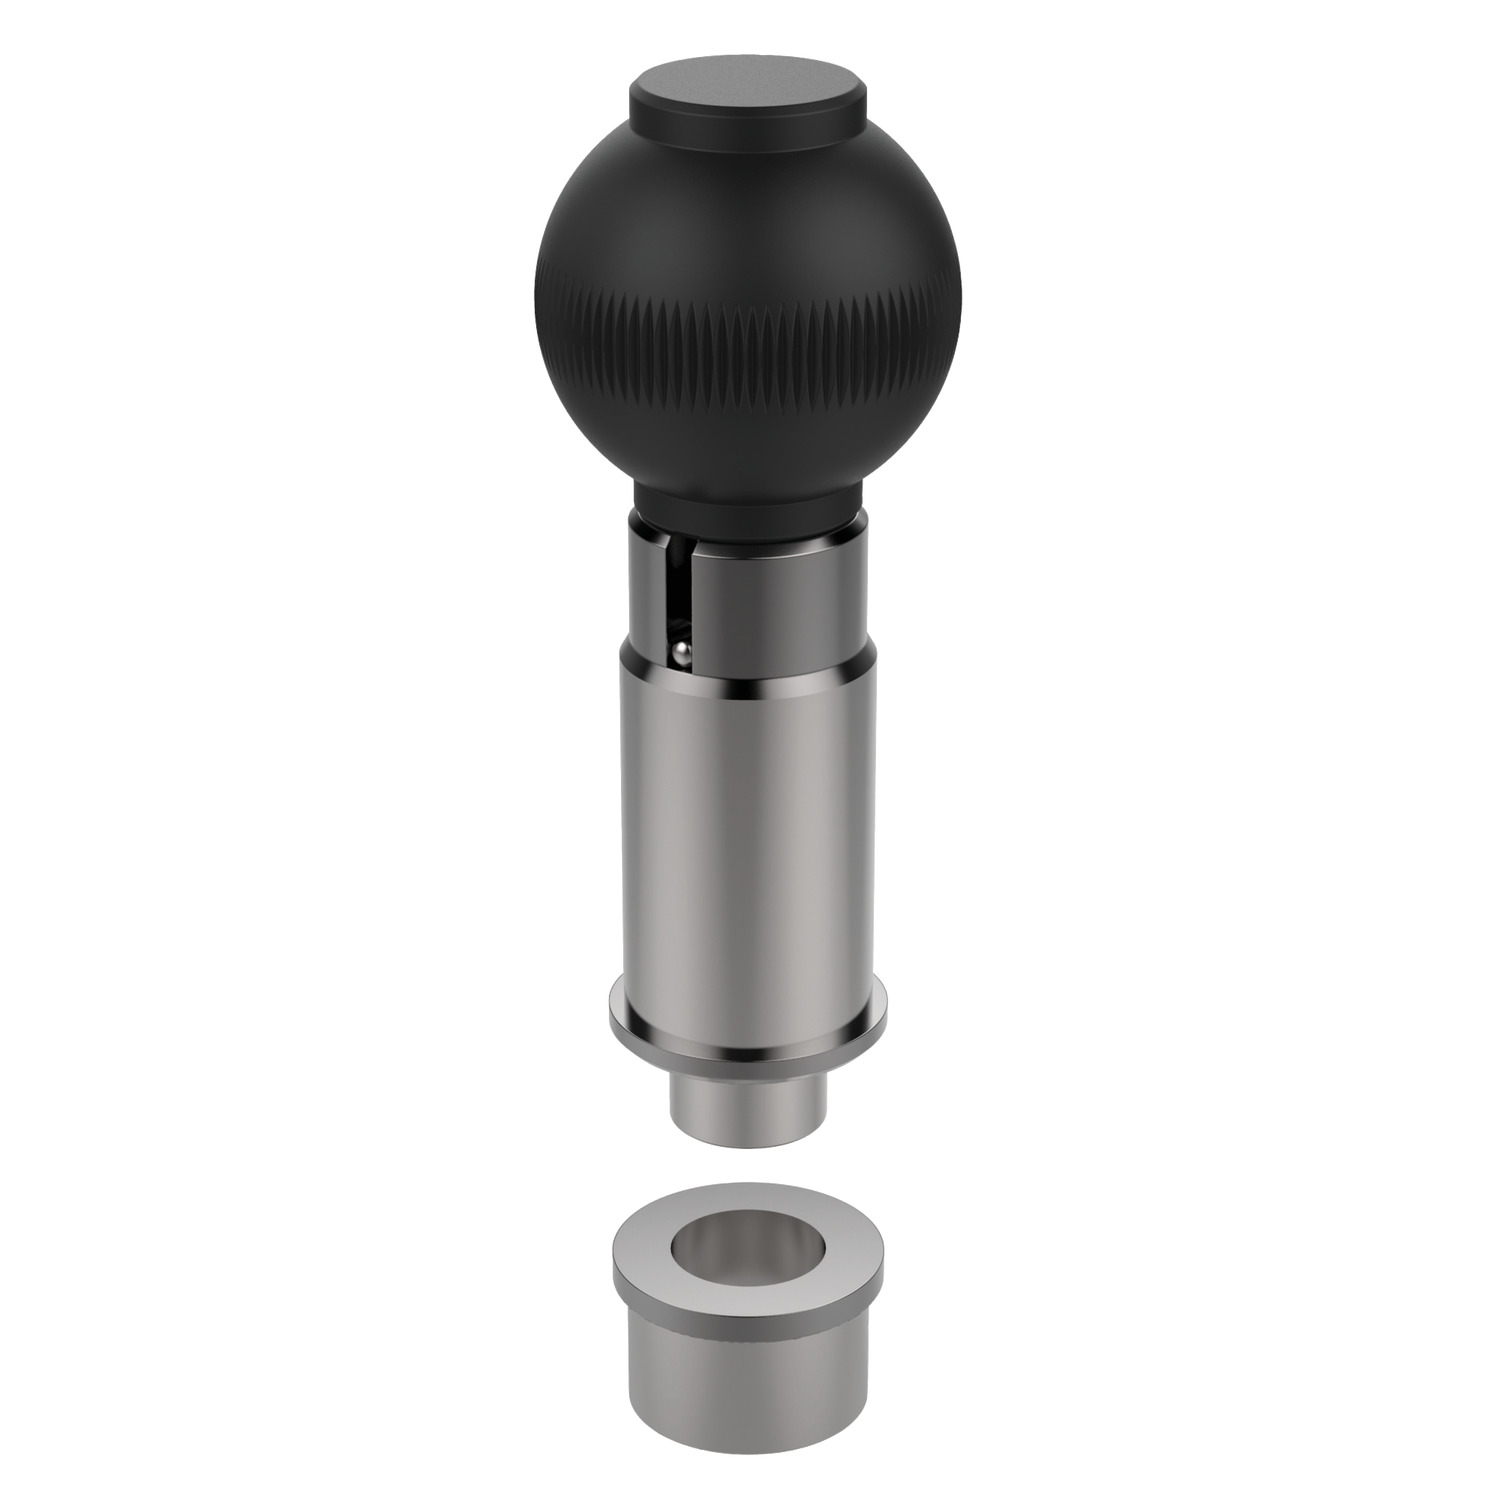 Index Plungers - Precision Precision index plungers with cylindrical pin, made from case hardened steel with thermoplastic grip. Available in locking or non-locking types.